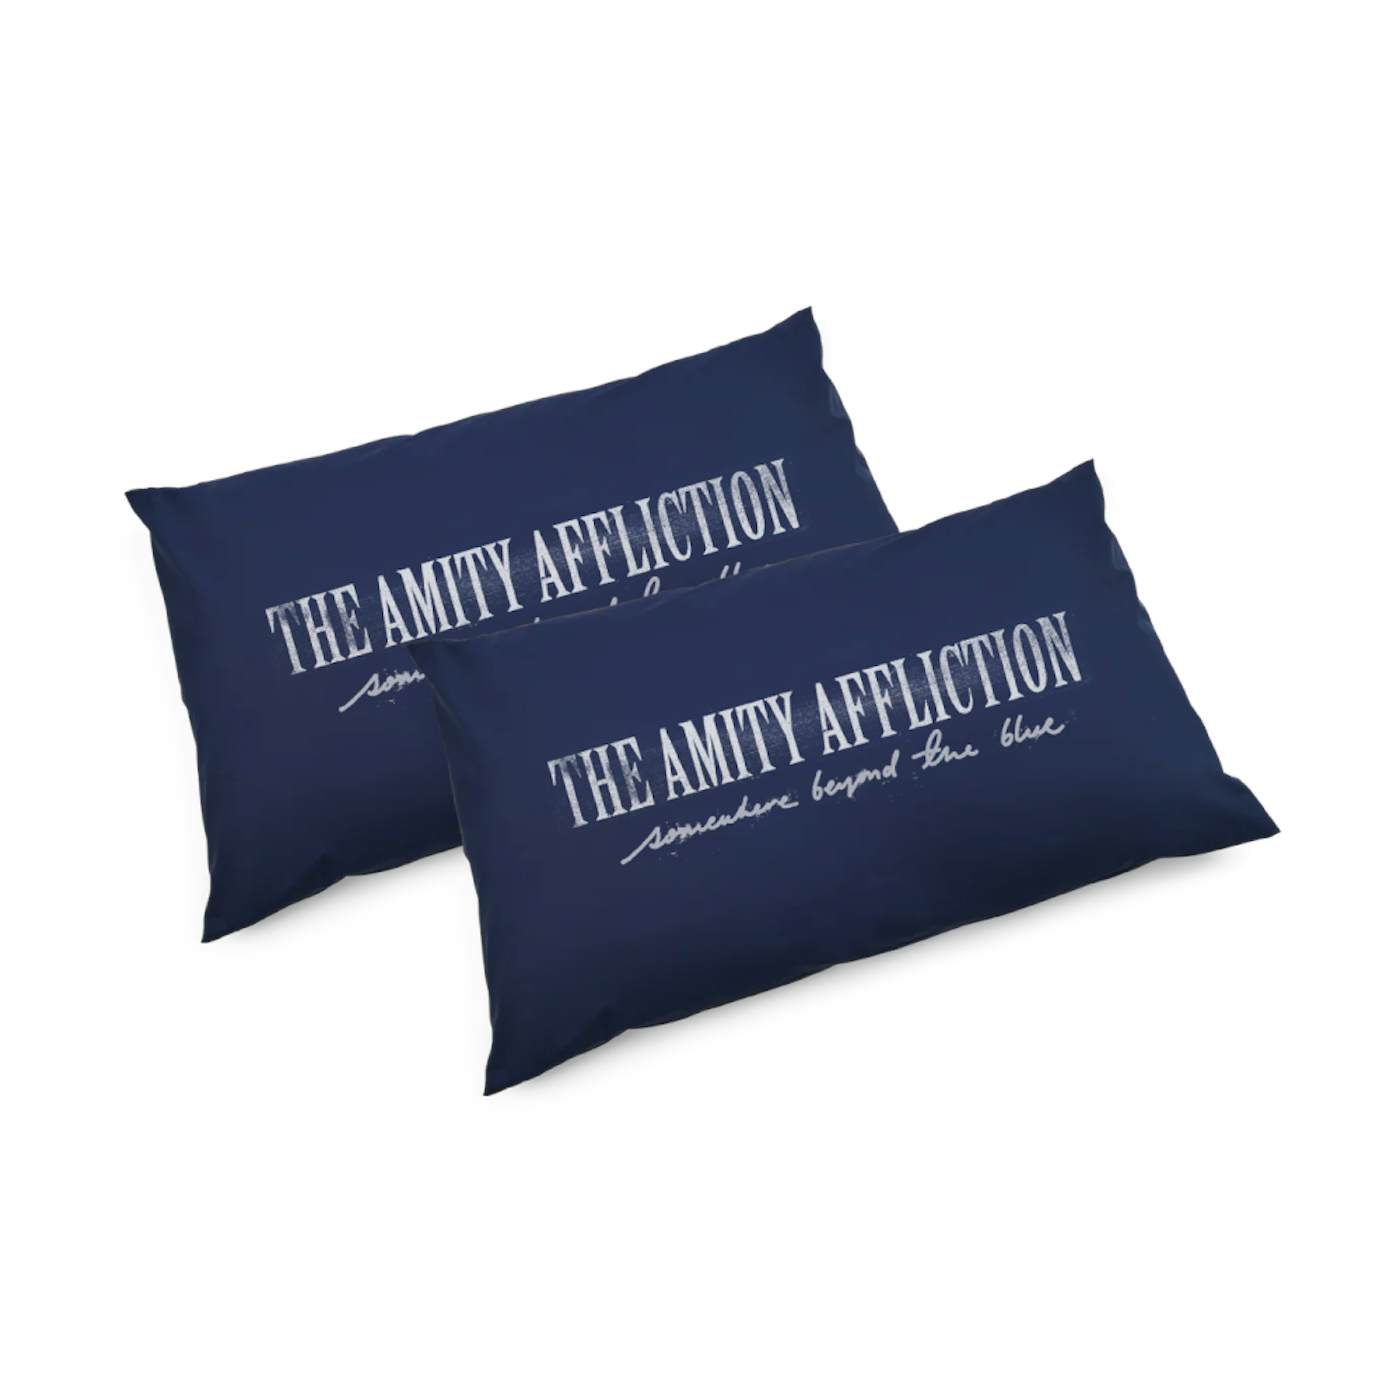 The Amity Affliction Somewhere Beyond the Blue pillow cases (Navy) Set of 2